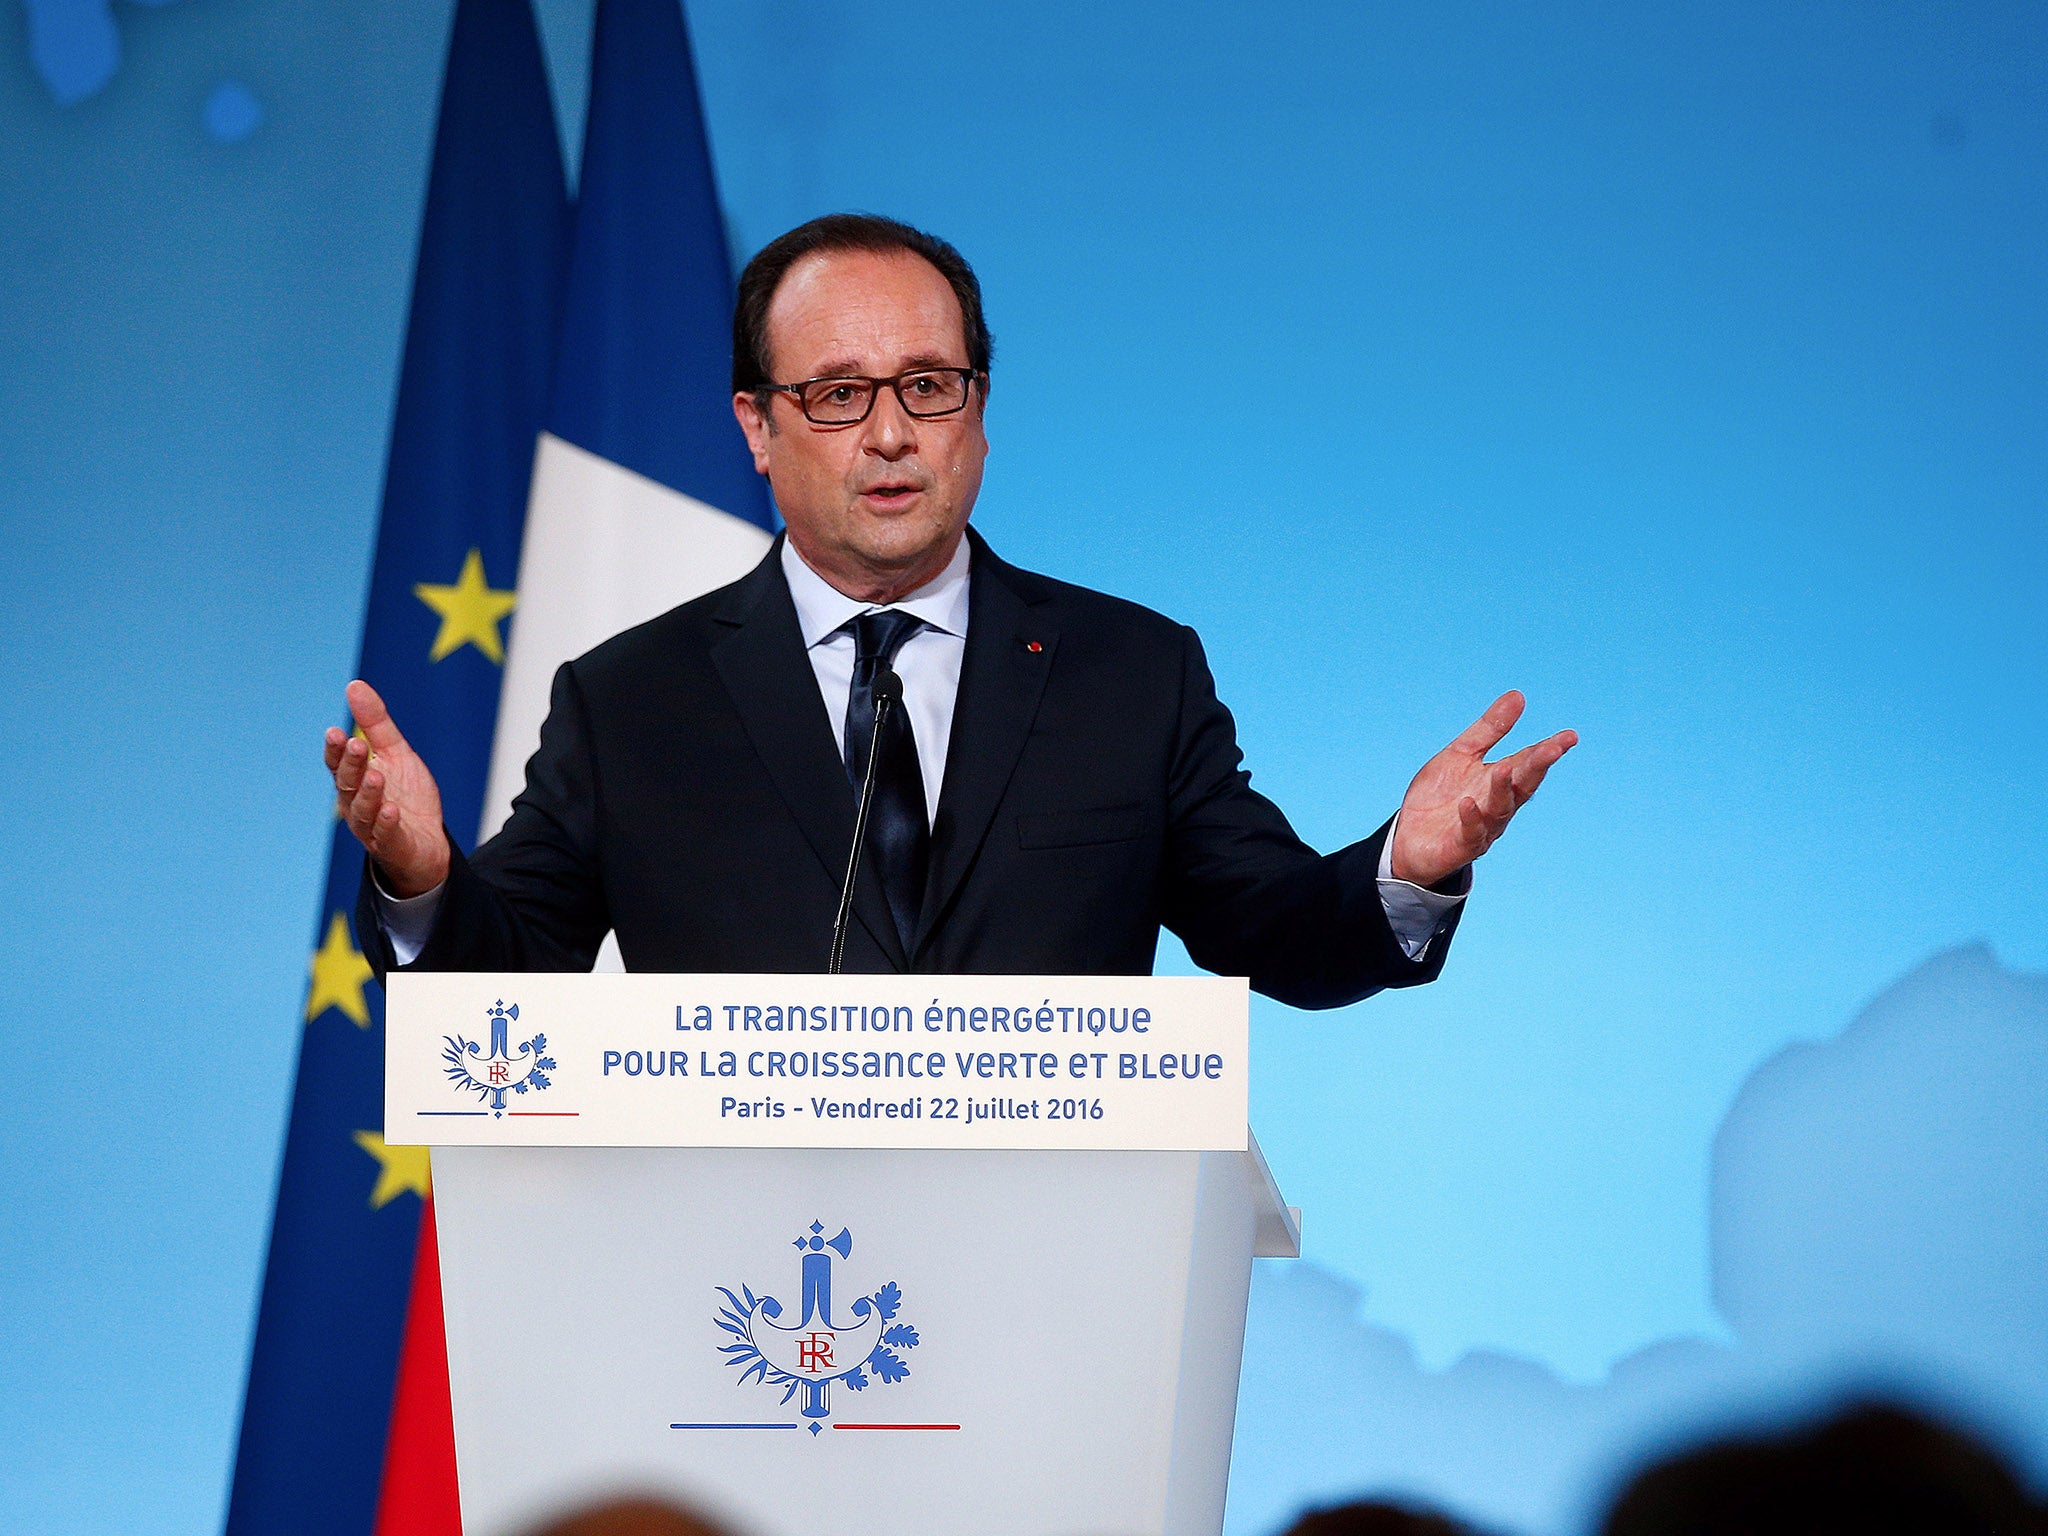 'Democracy is at stake', warns French president Francois Hollande